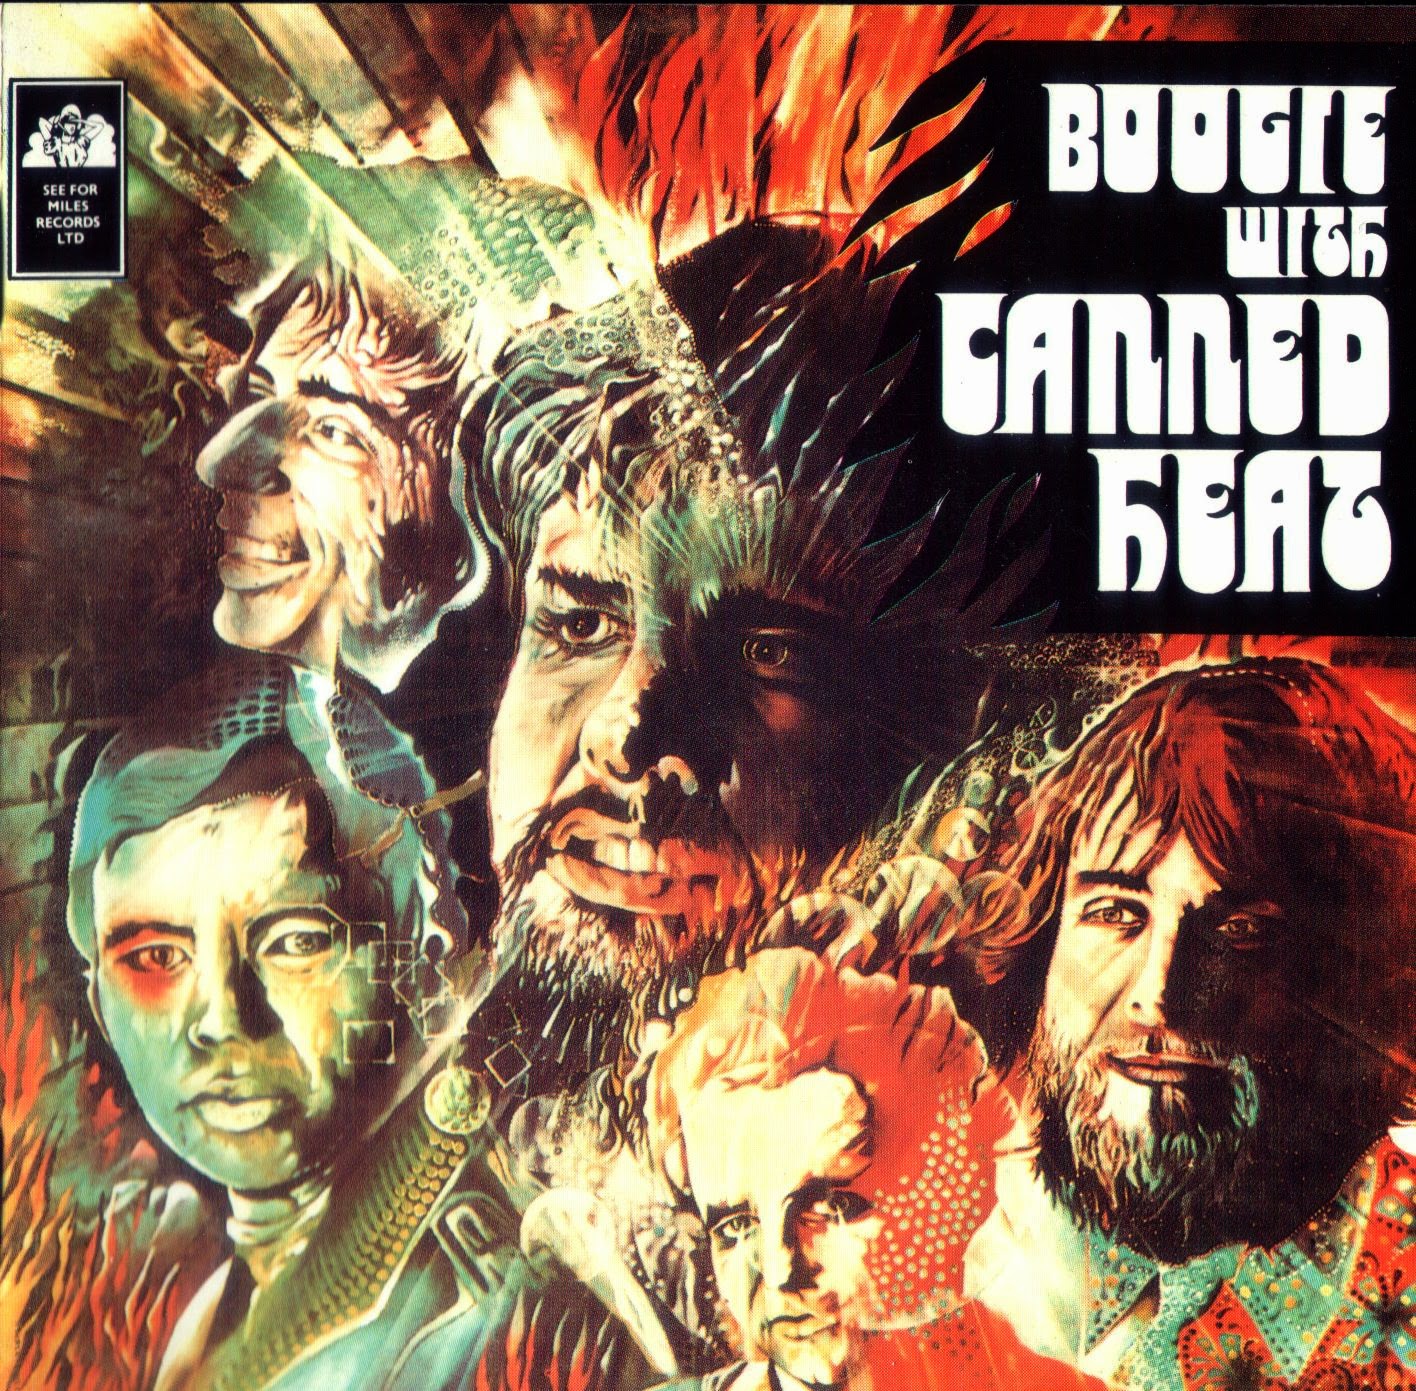 Canned heat steam фото 38